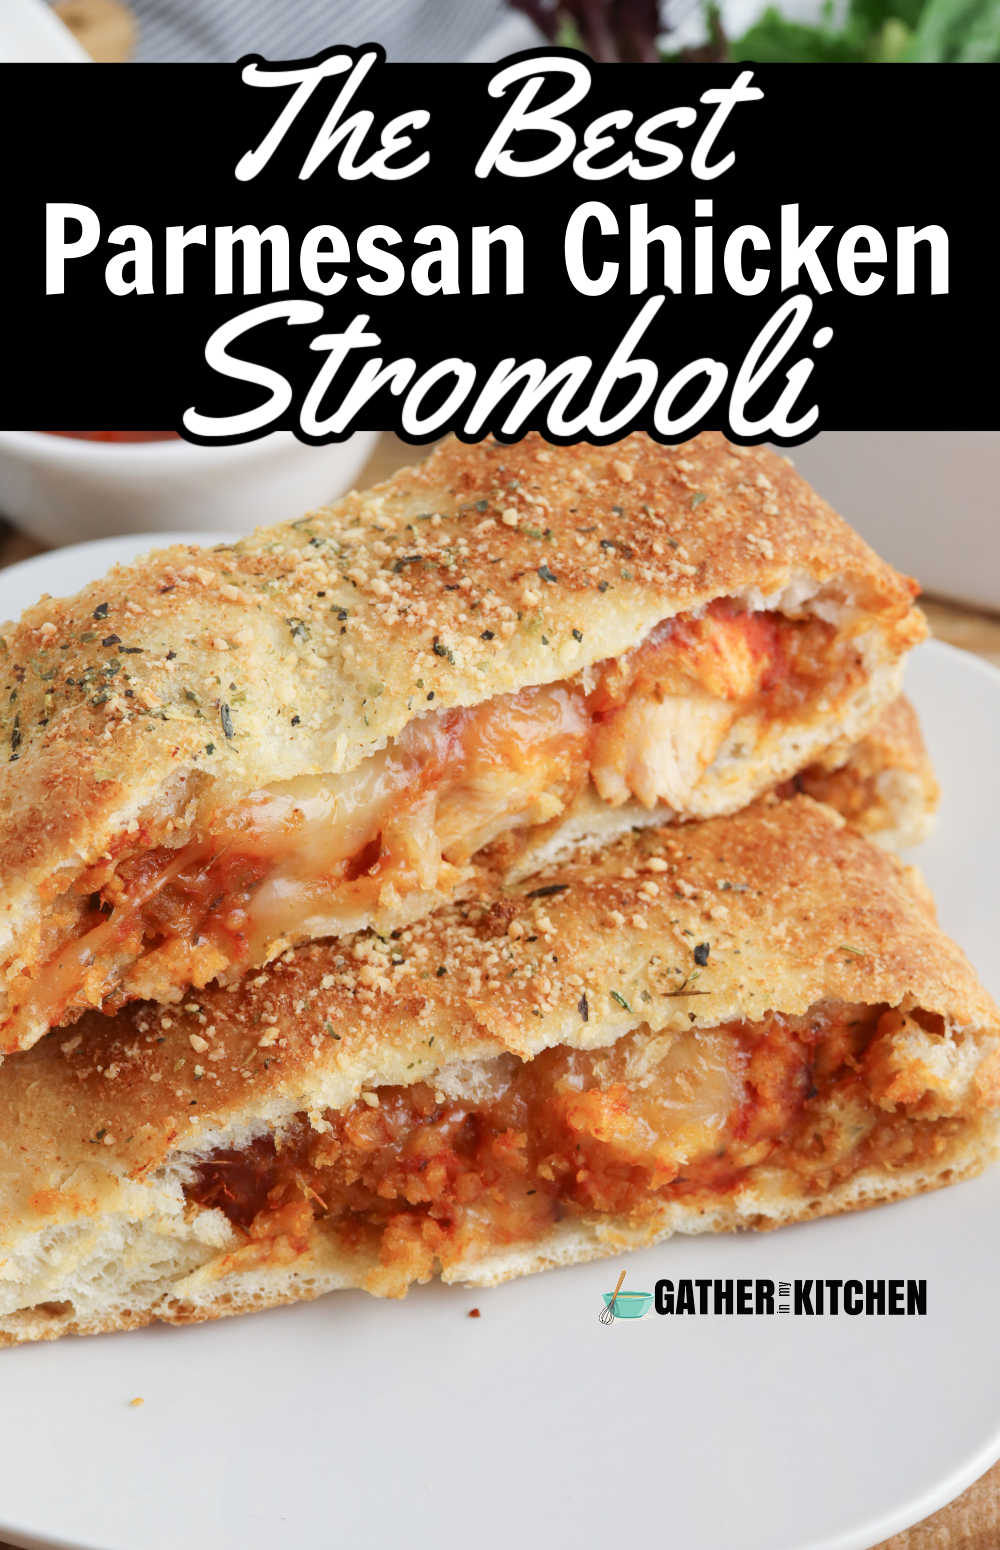 Pin image: top says "The best parmesan chicken stromboli" with two slices of stromboli on a plate.